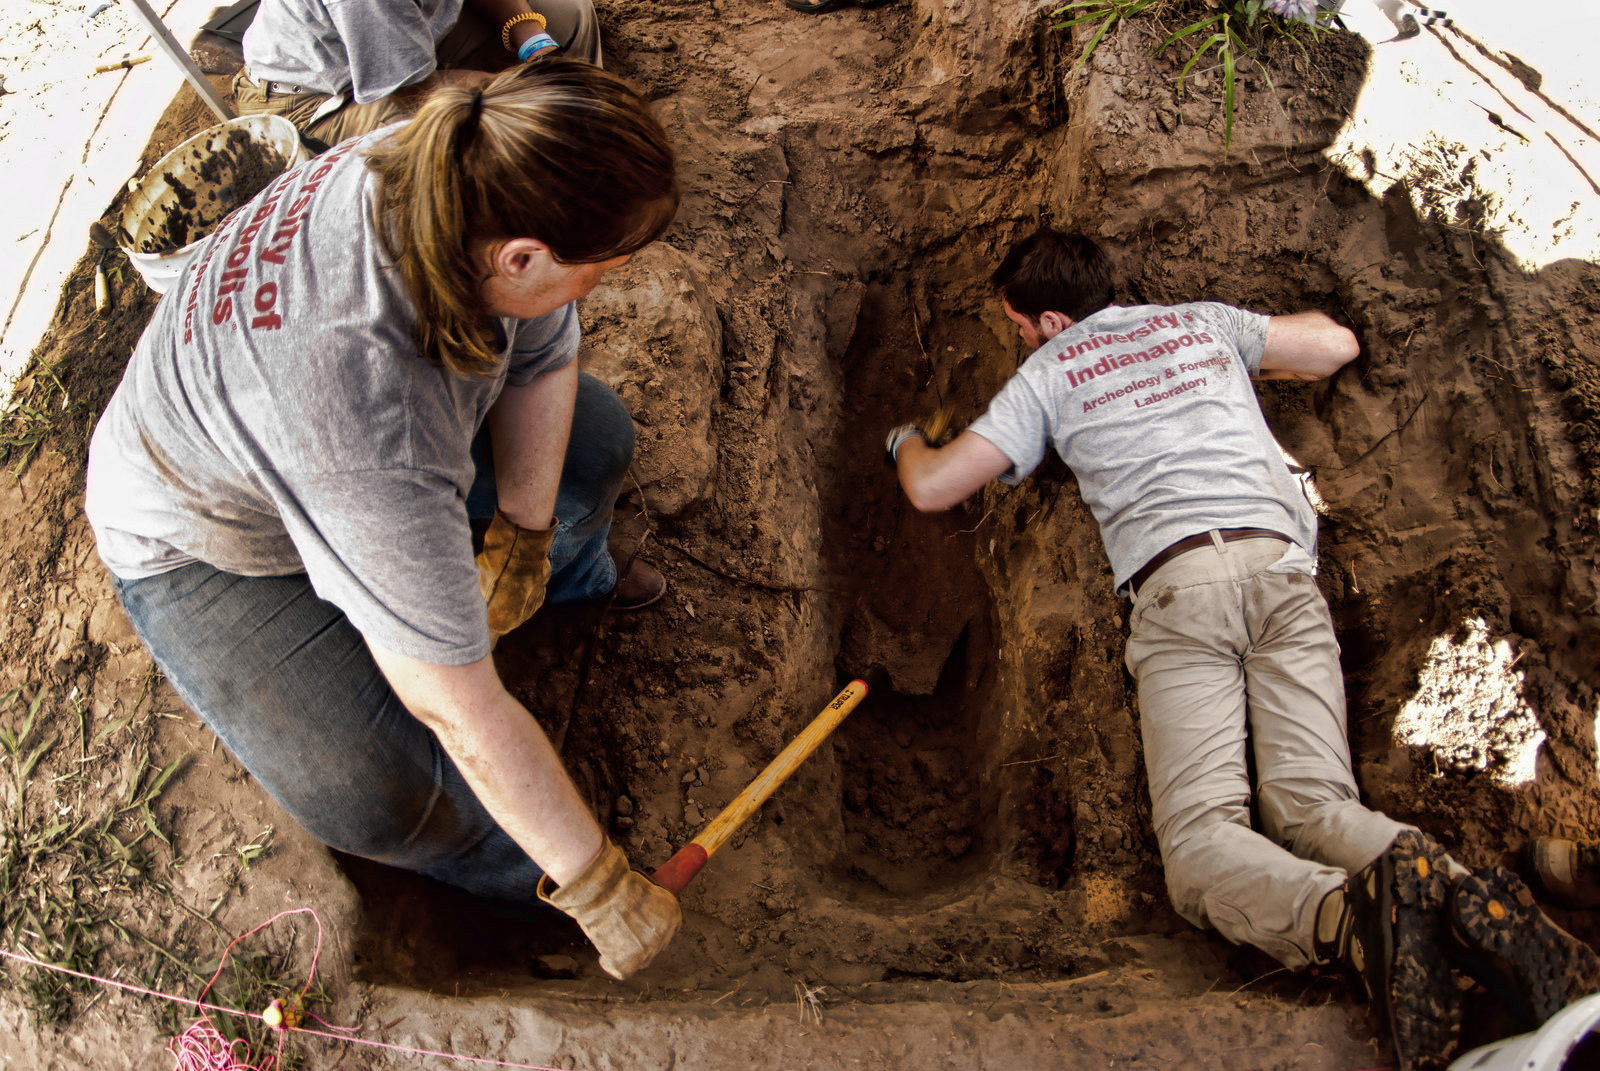 Jessica holding a shovel in a burial as Ryan lay deeper in the burial removing dirt